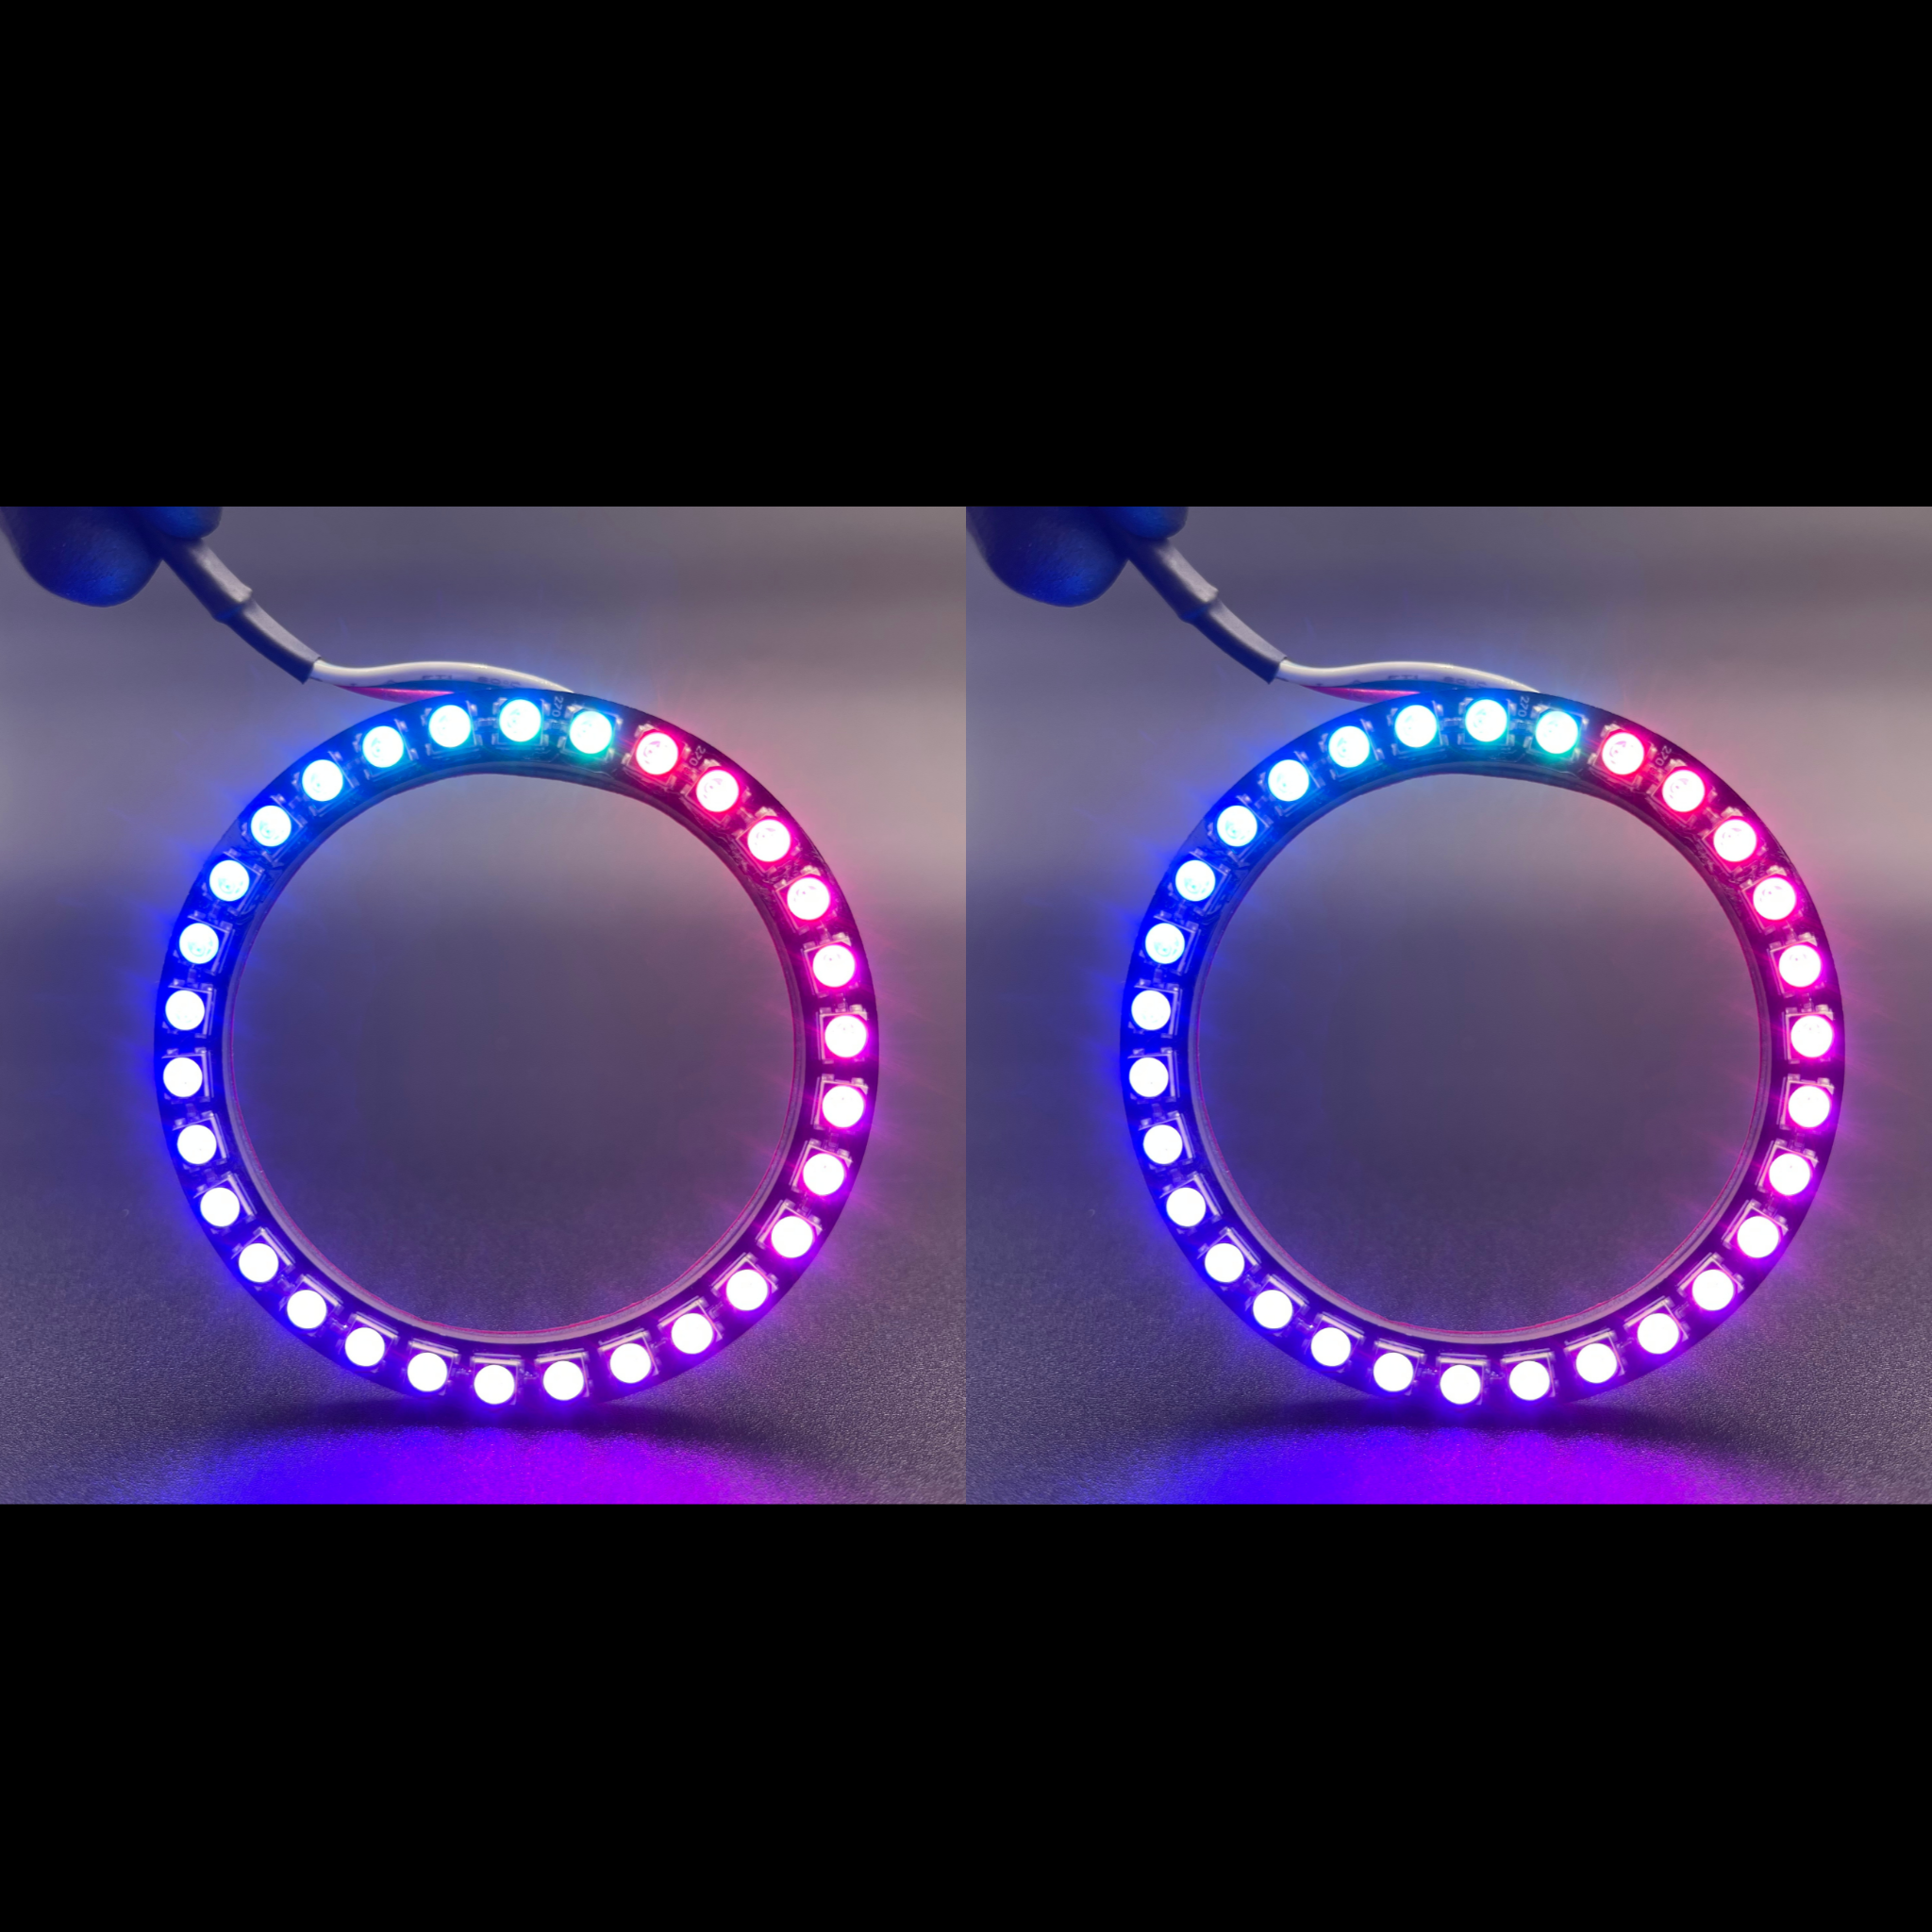 1998-2004 Volkswagen Golf GT Multicolor Halo Kit - RGB Halo Kits Multicolor Flow Series Color Chasing RGBWA LED headlight kit Colorshift Oracle Lighting Trendz OneUpLighting Morimoto theretrofitsource AutoLEDTech Diode Dynamics